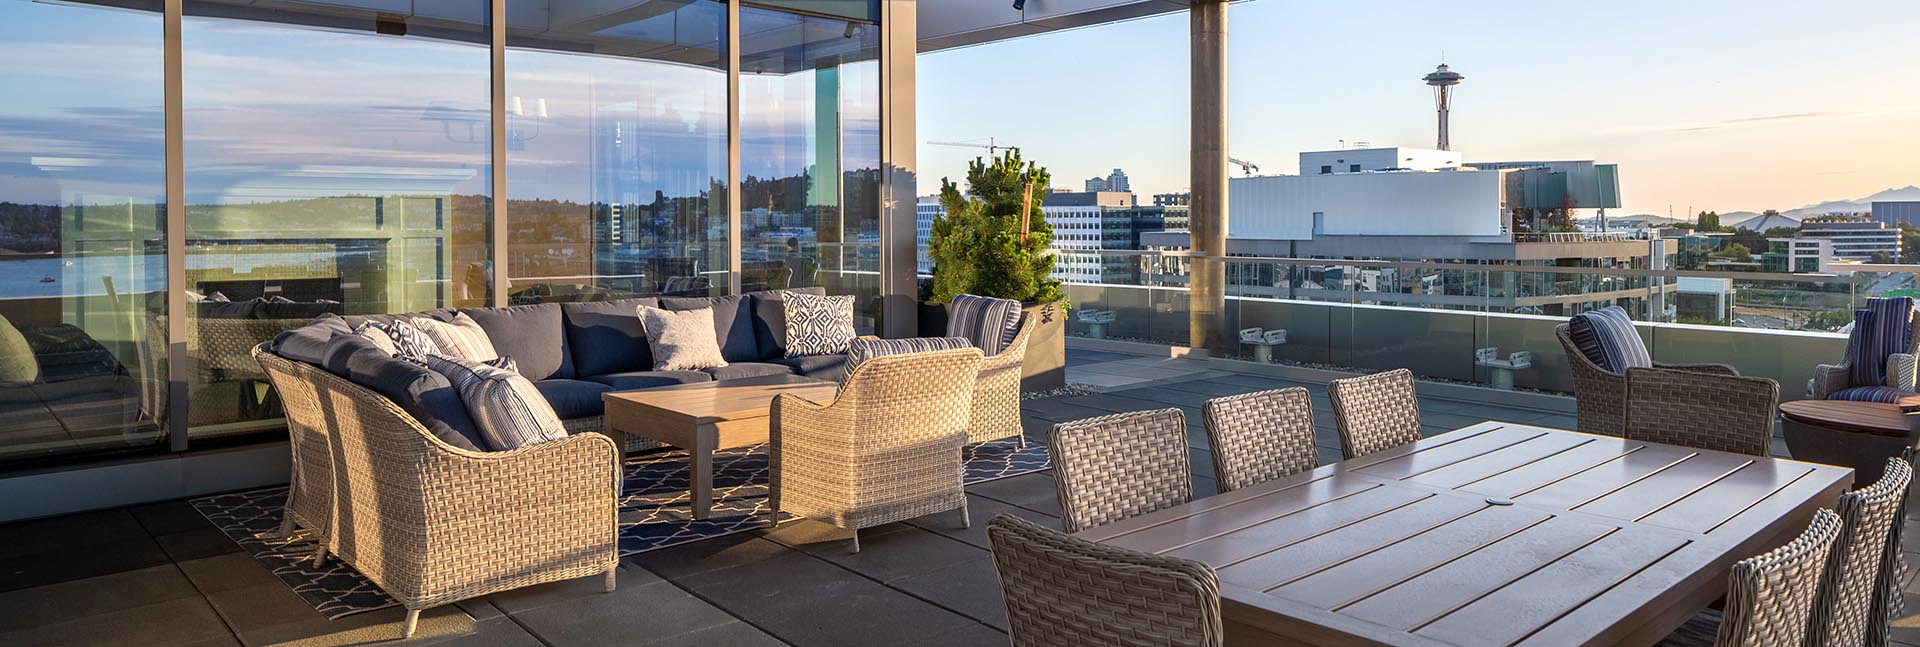 Rooftop seating area and dining table with city and Space Needle in background